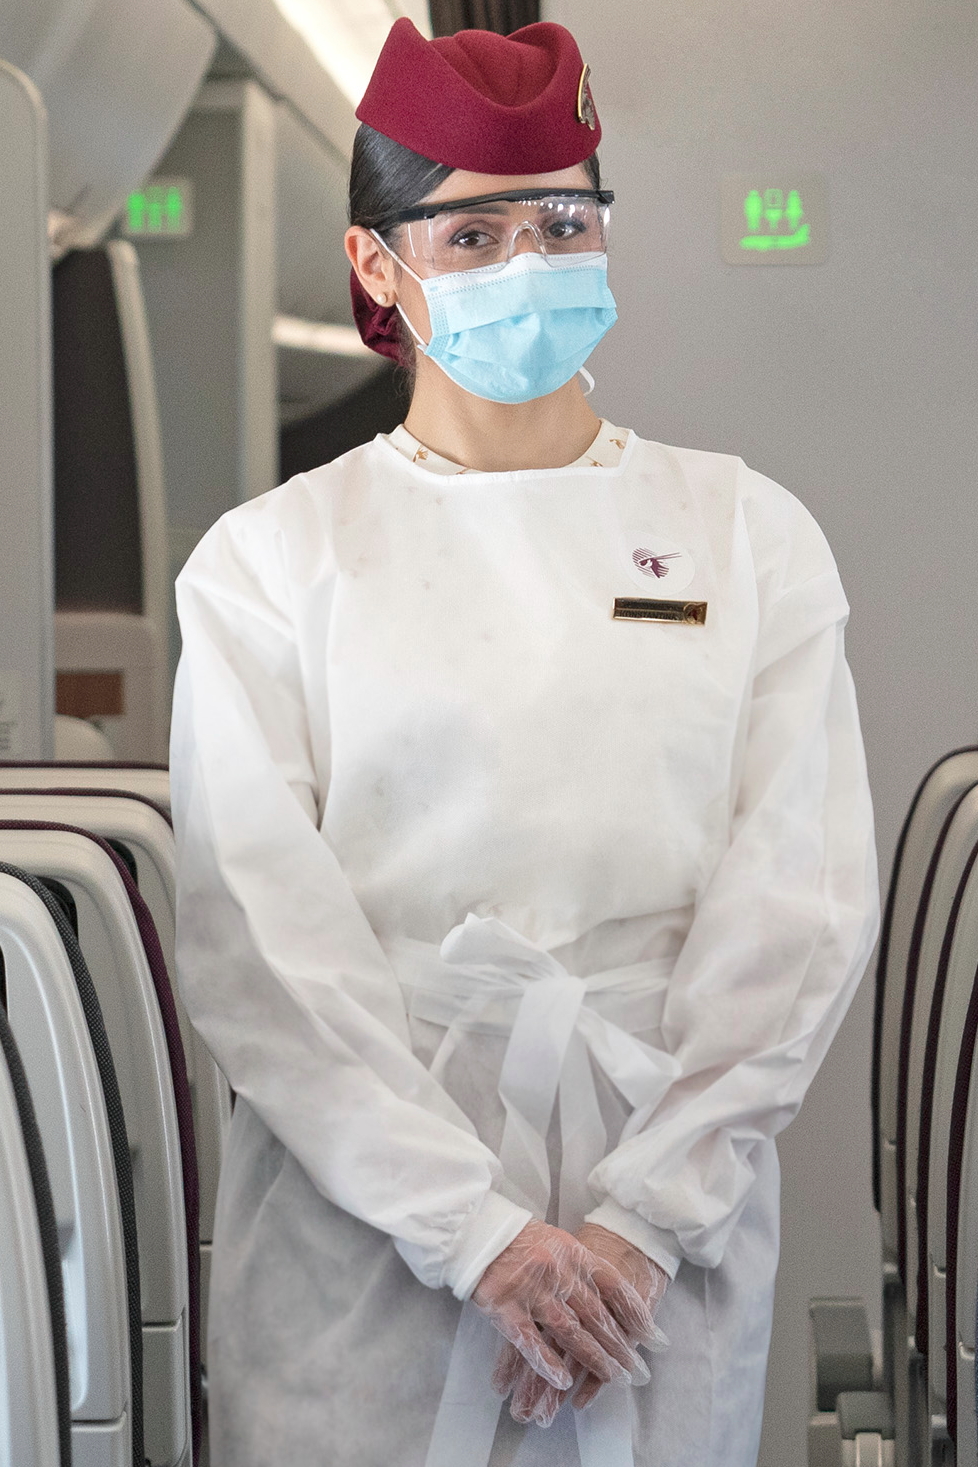 Qatar Airways has introduced new disposable protective gowns for cabin crew that are fitted over their uniforms, in addition to safety glasses, gloves and a mask. The new branded gowns are personalised with Qatar Airways’ logo imprinted on the top left corner. Click to enlarge.